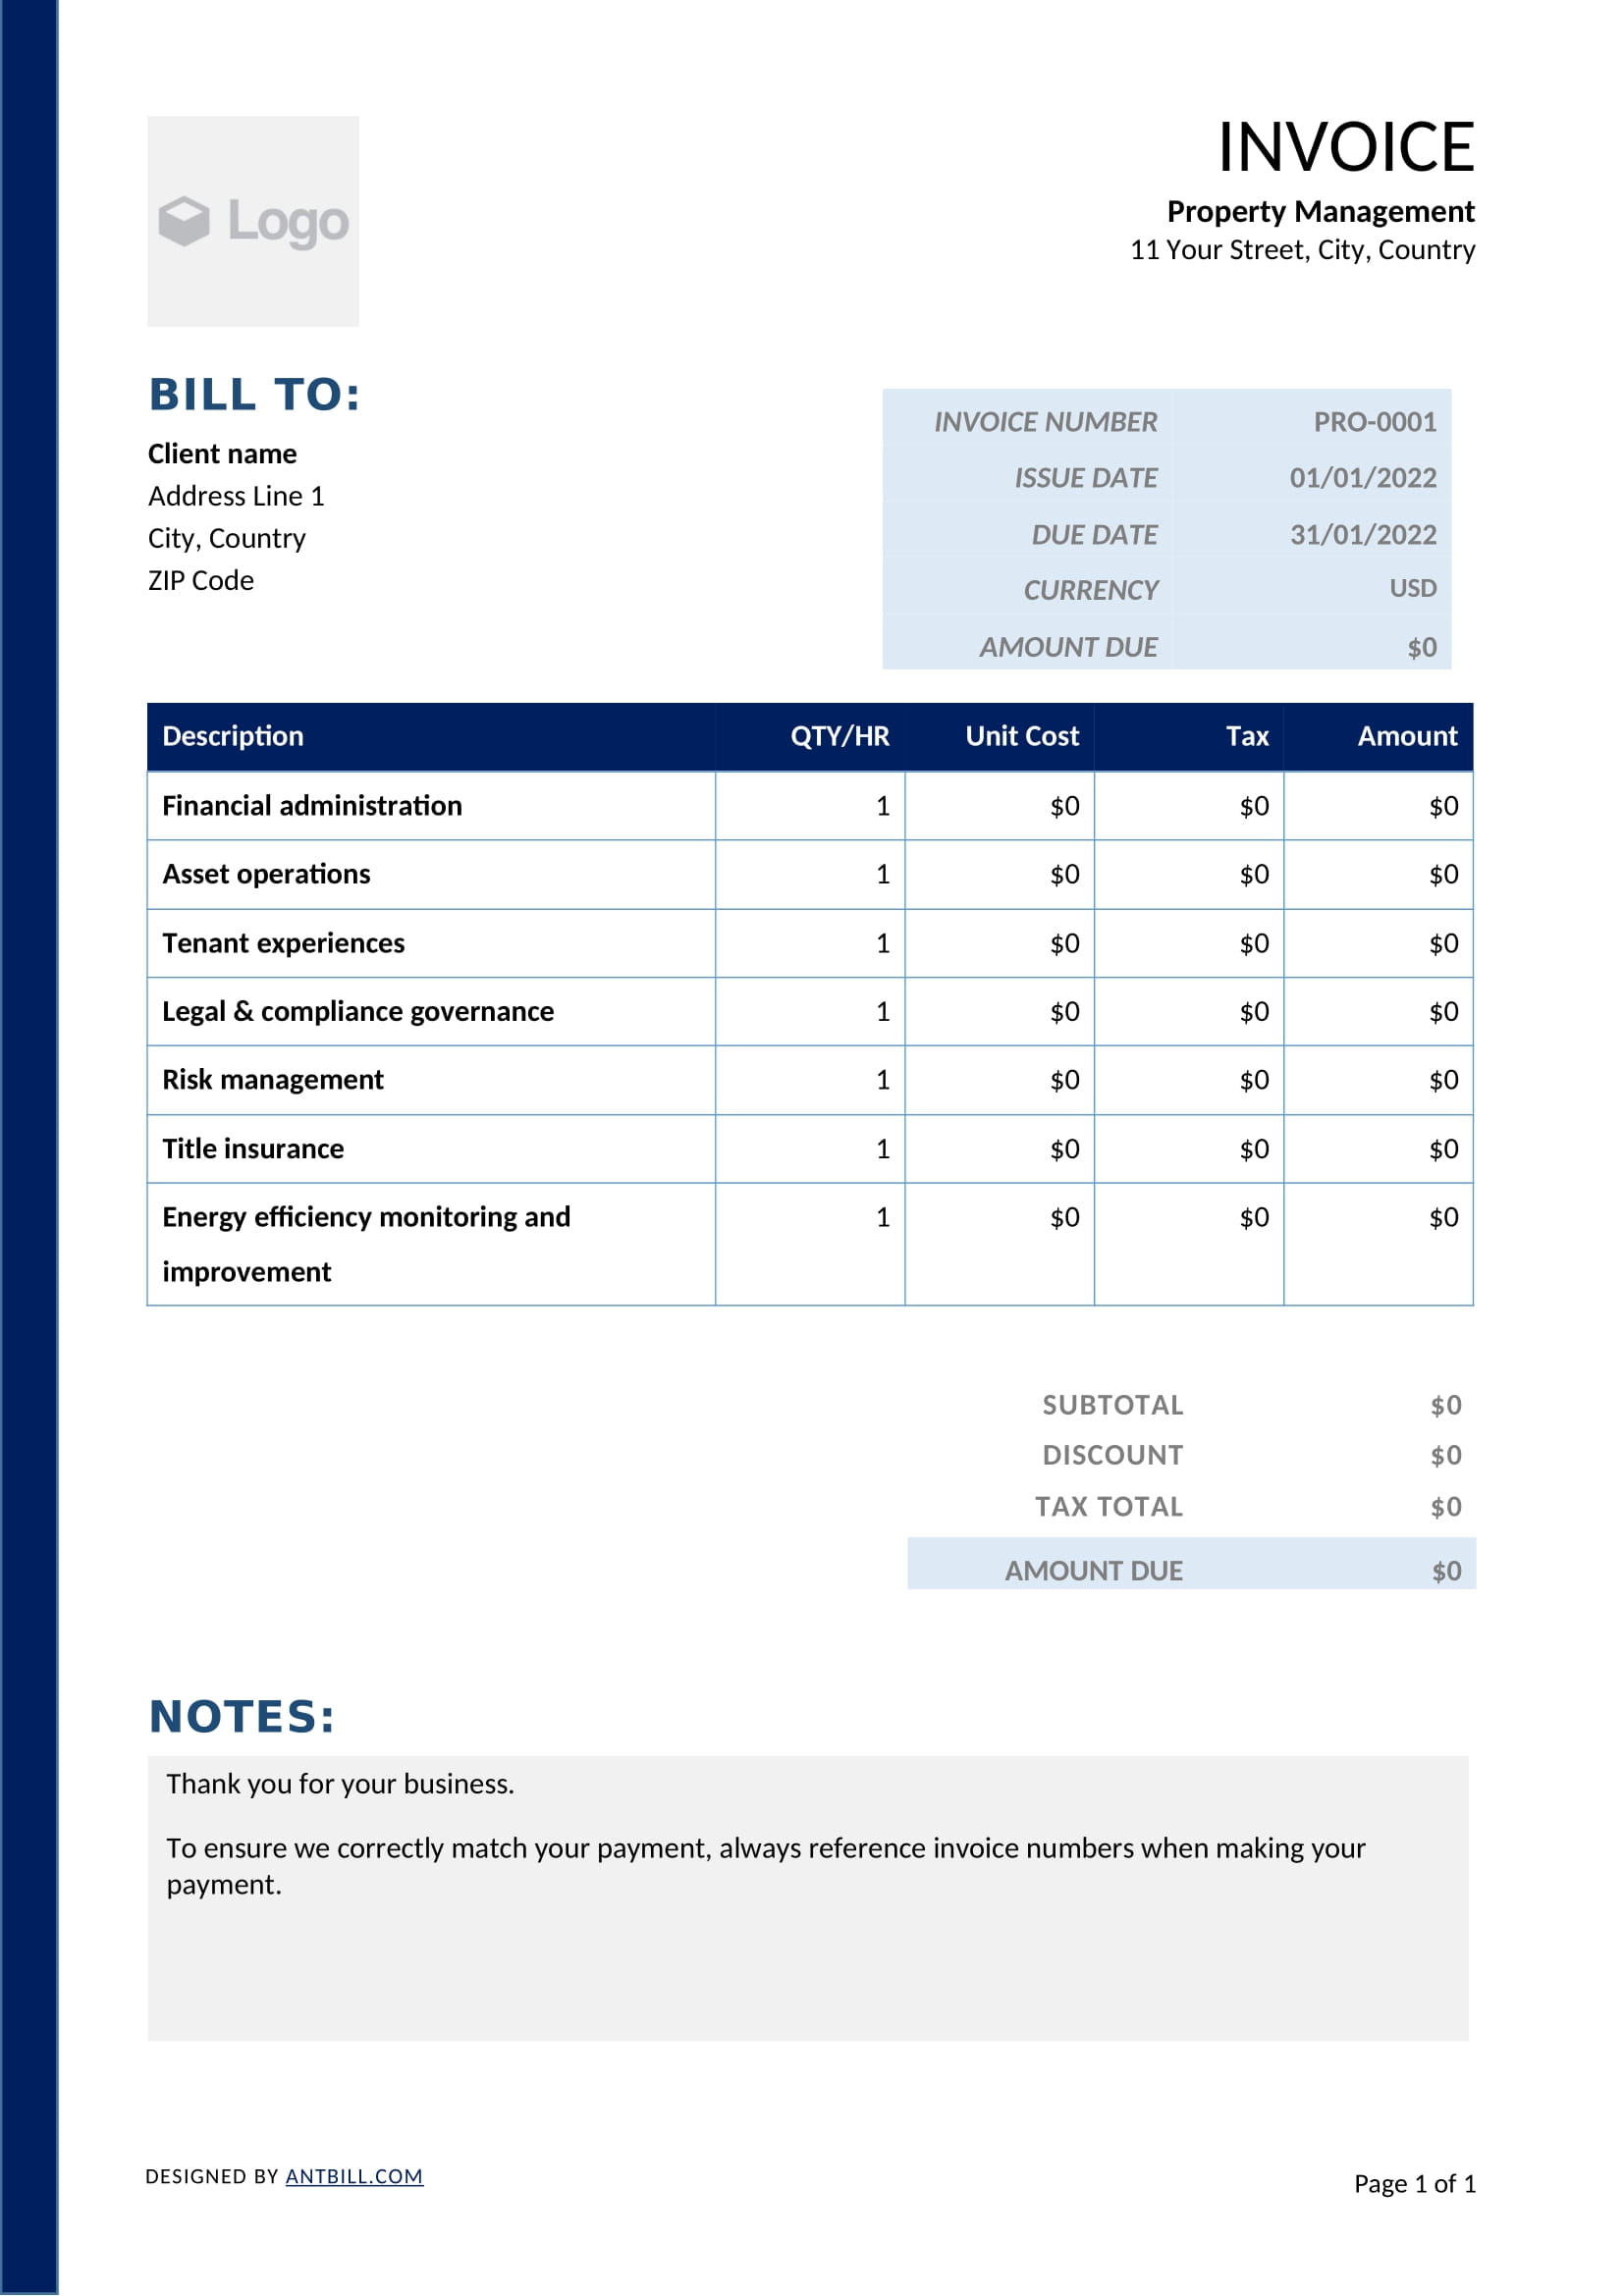 Property Management Invoice Template - professional